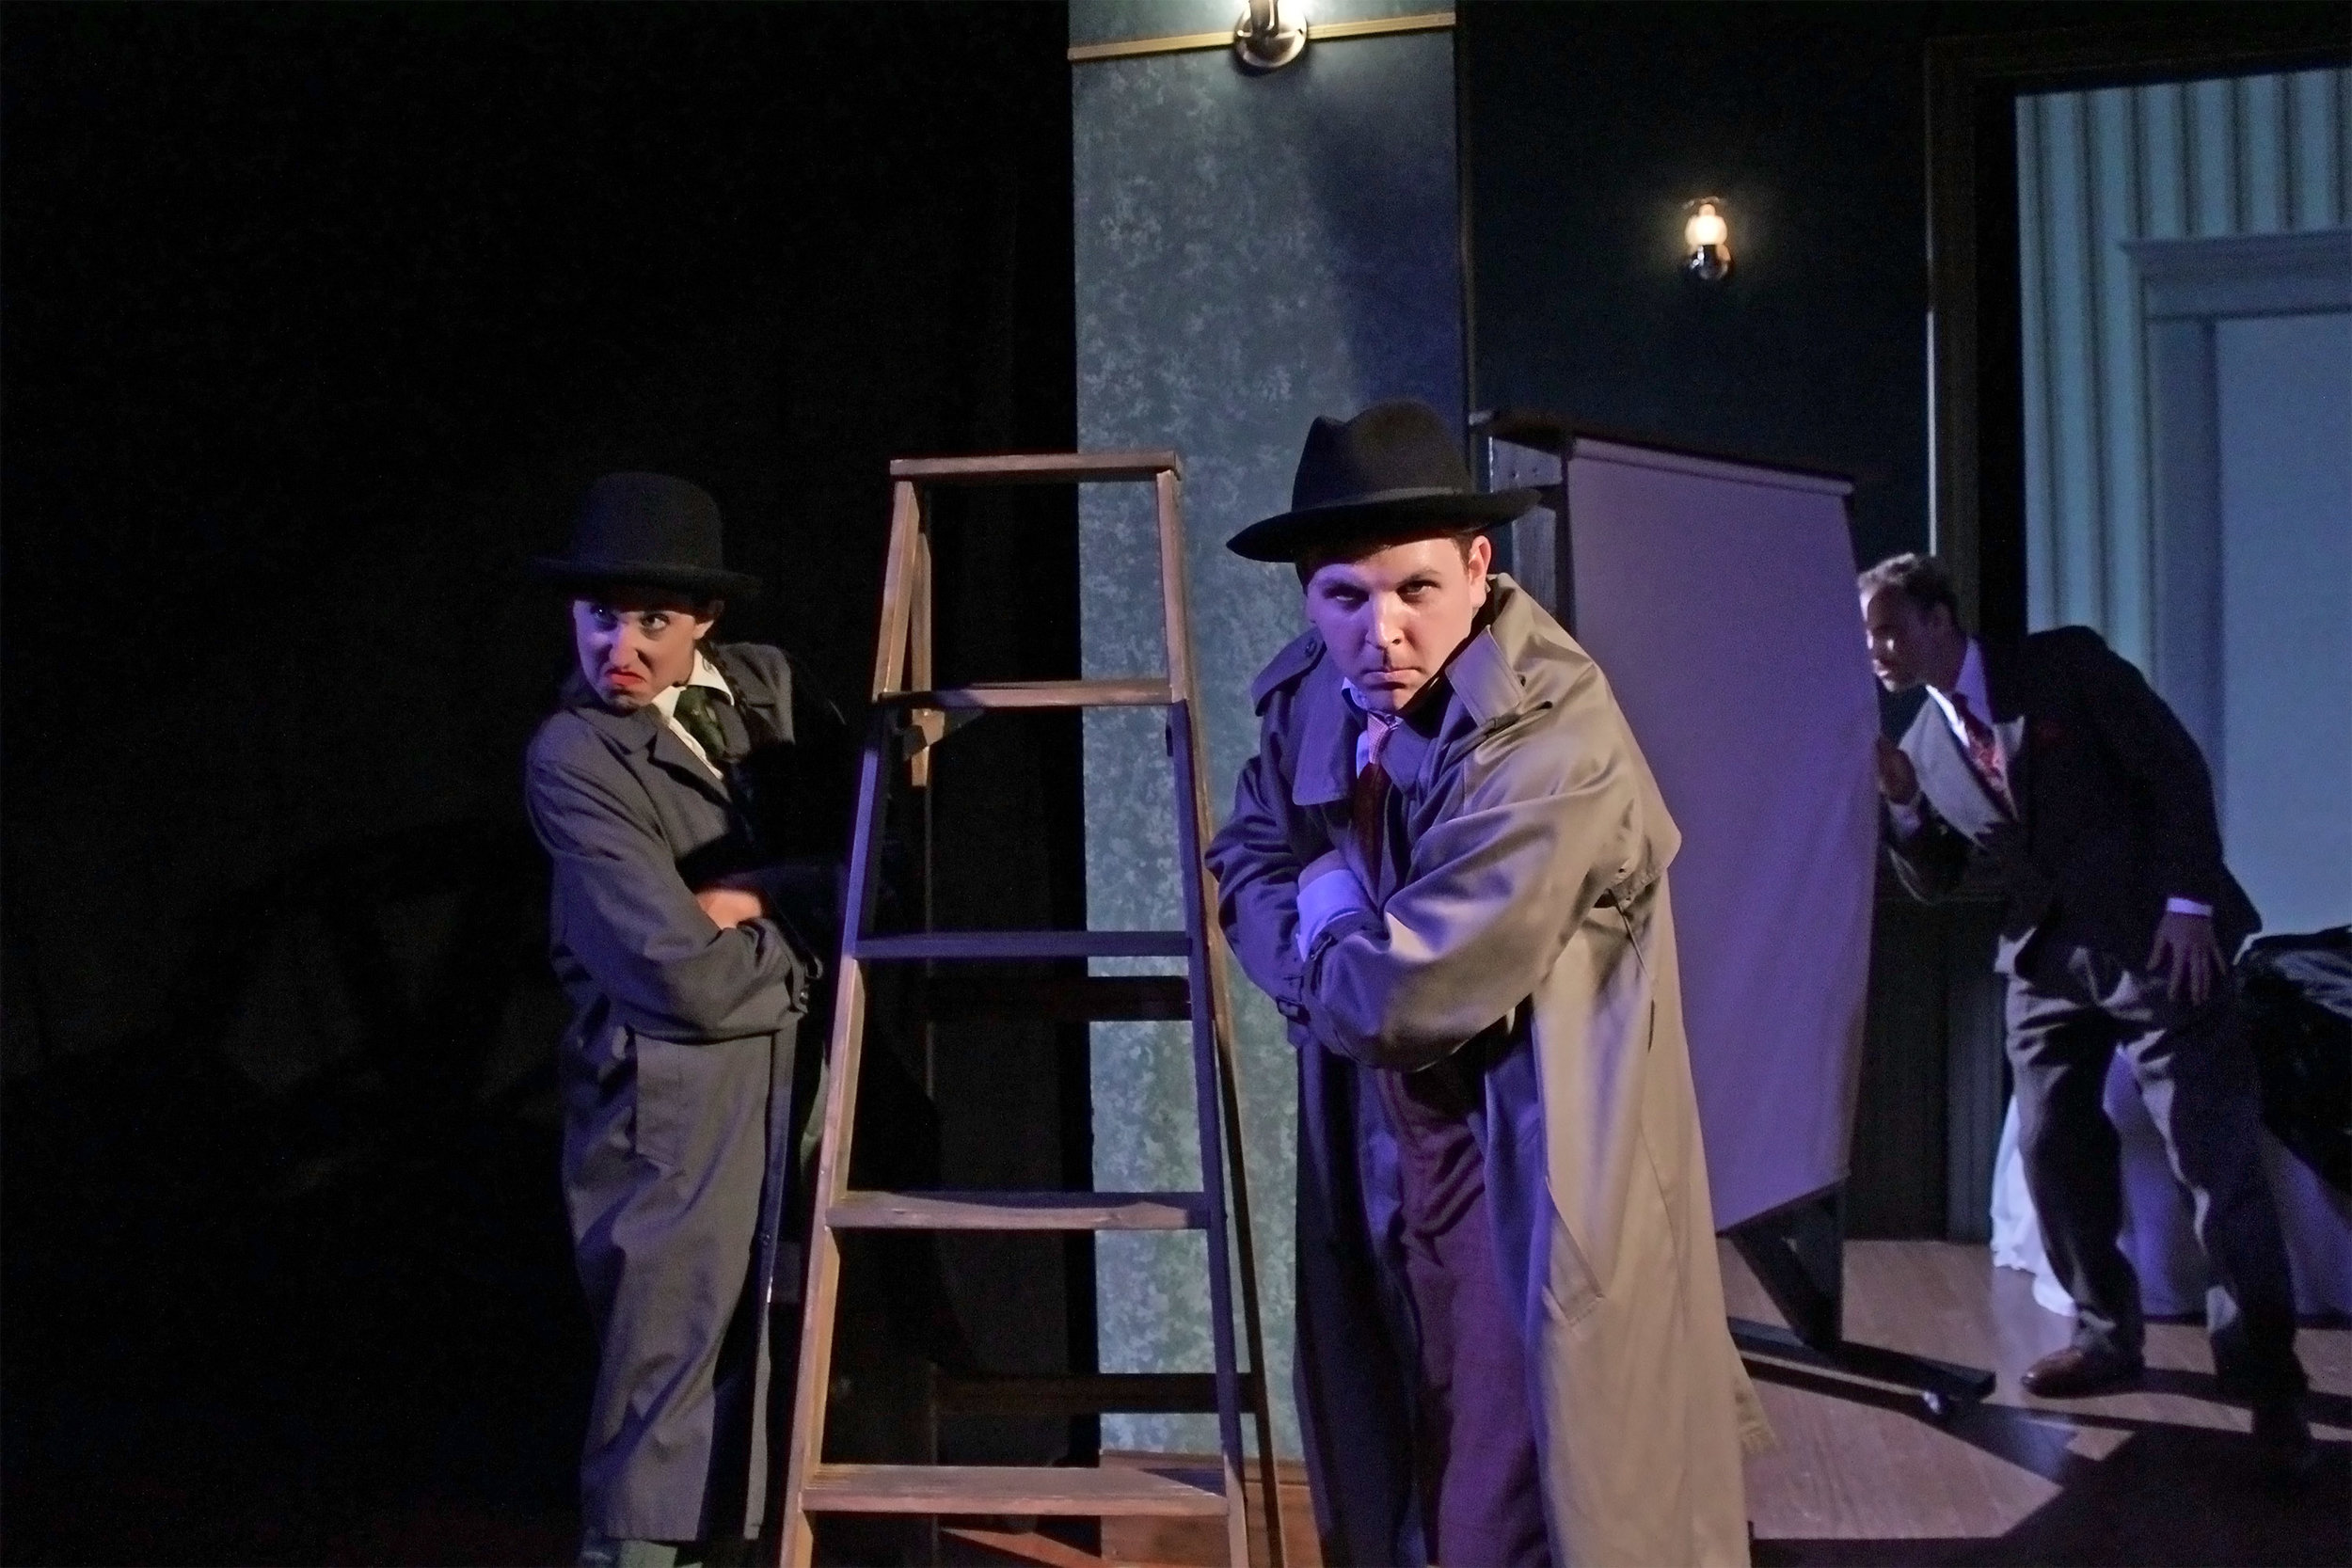   The 39 Steps  - Southampton Cultural Center (New York, 2017) 